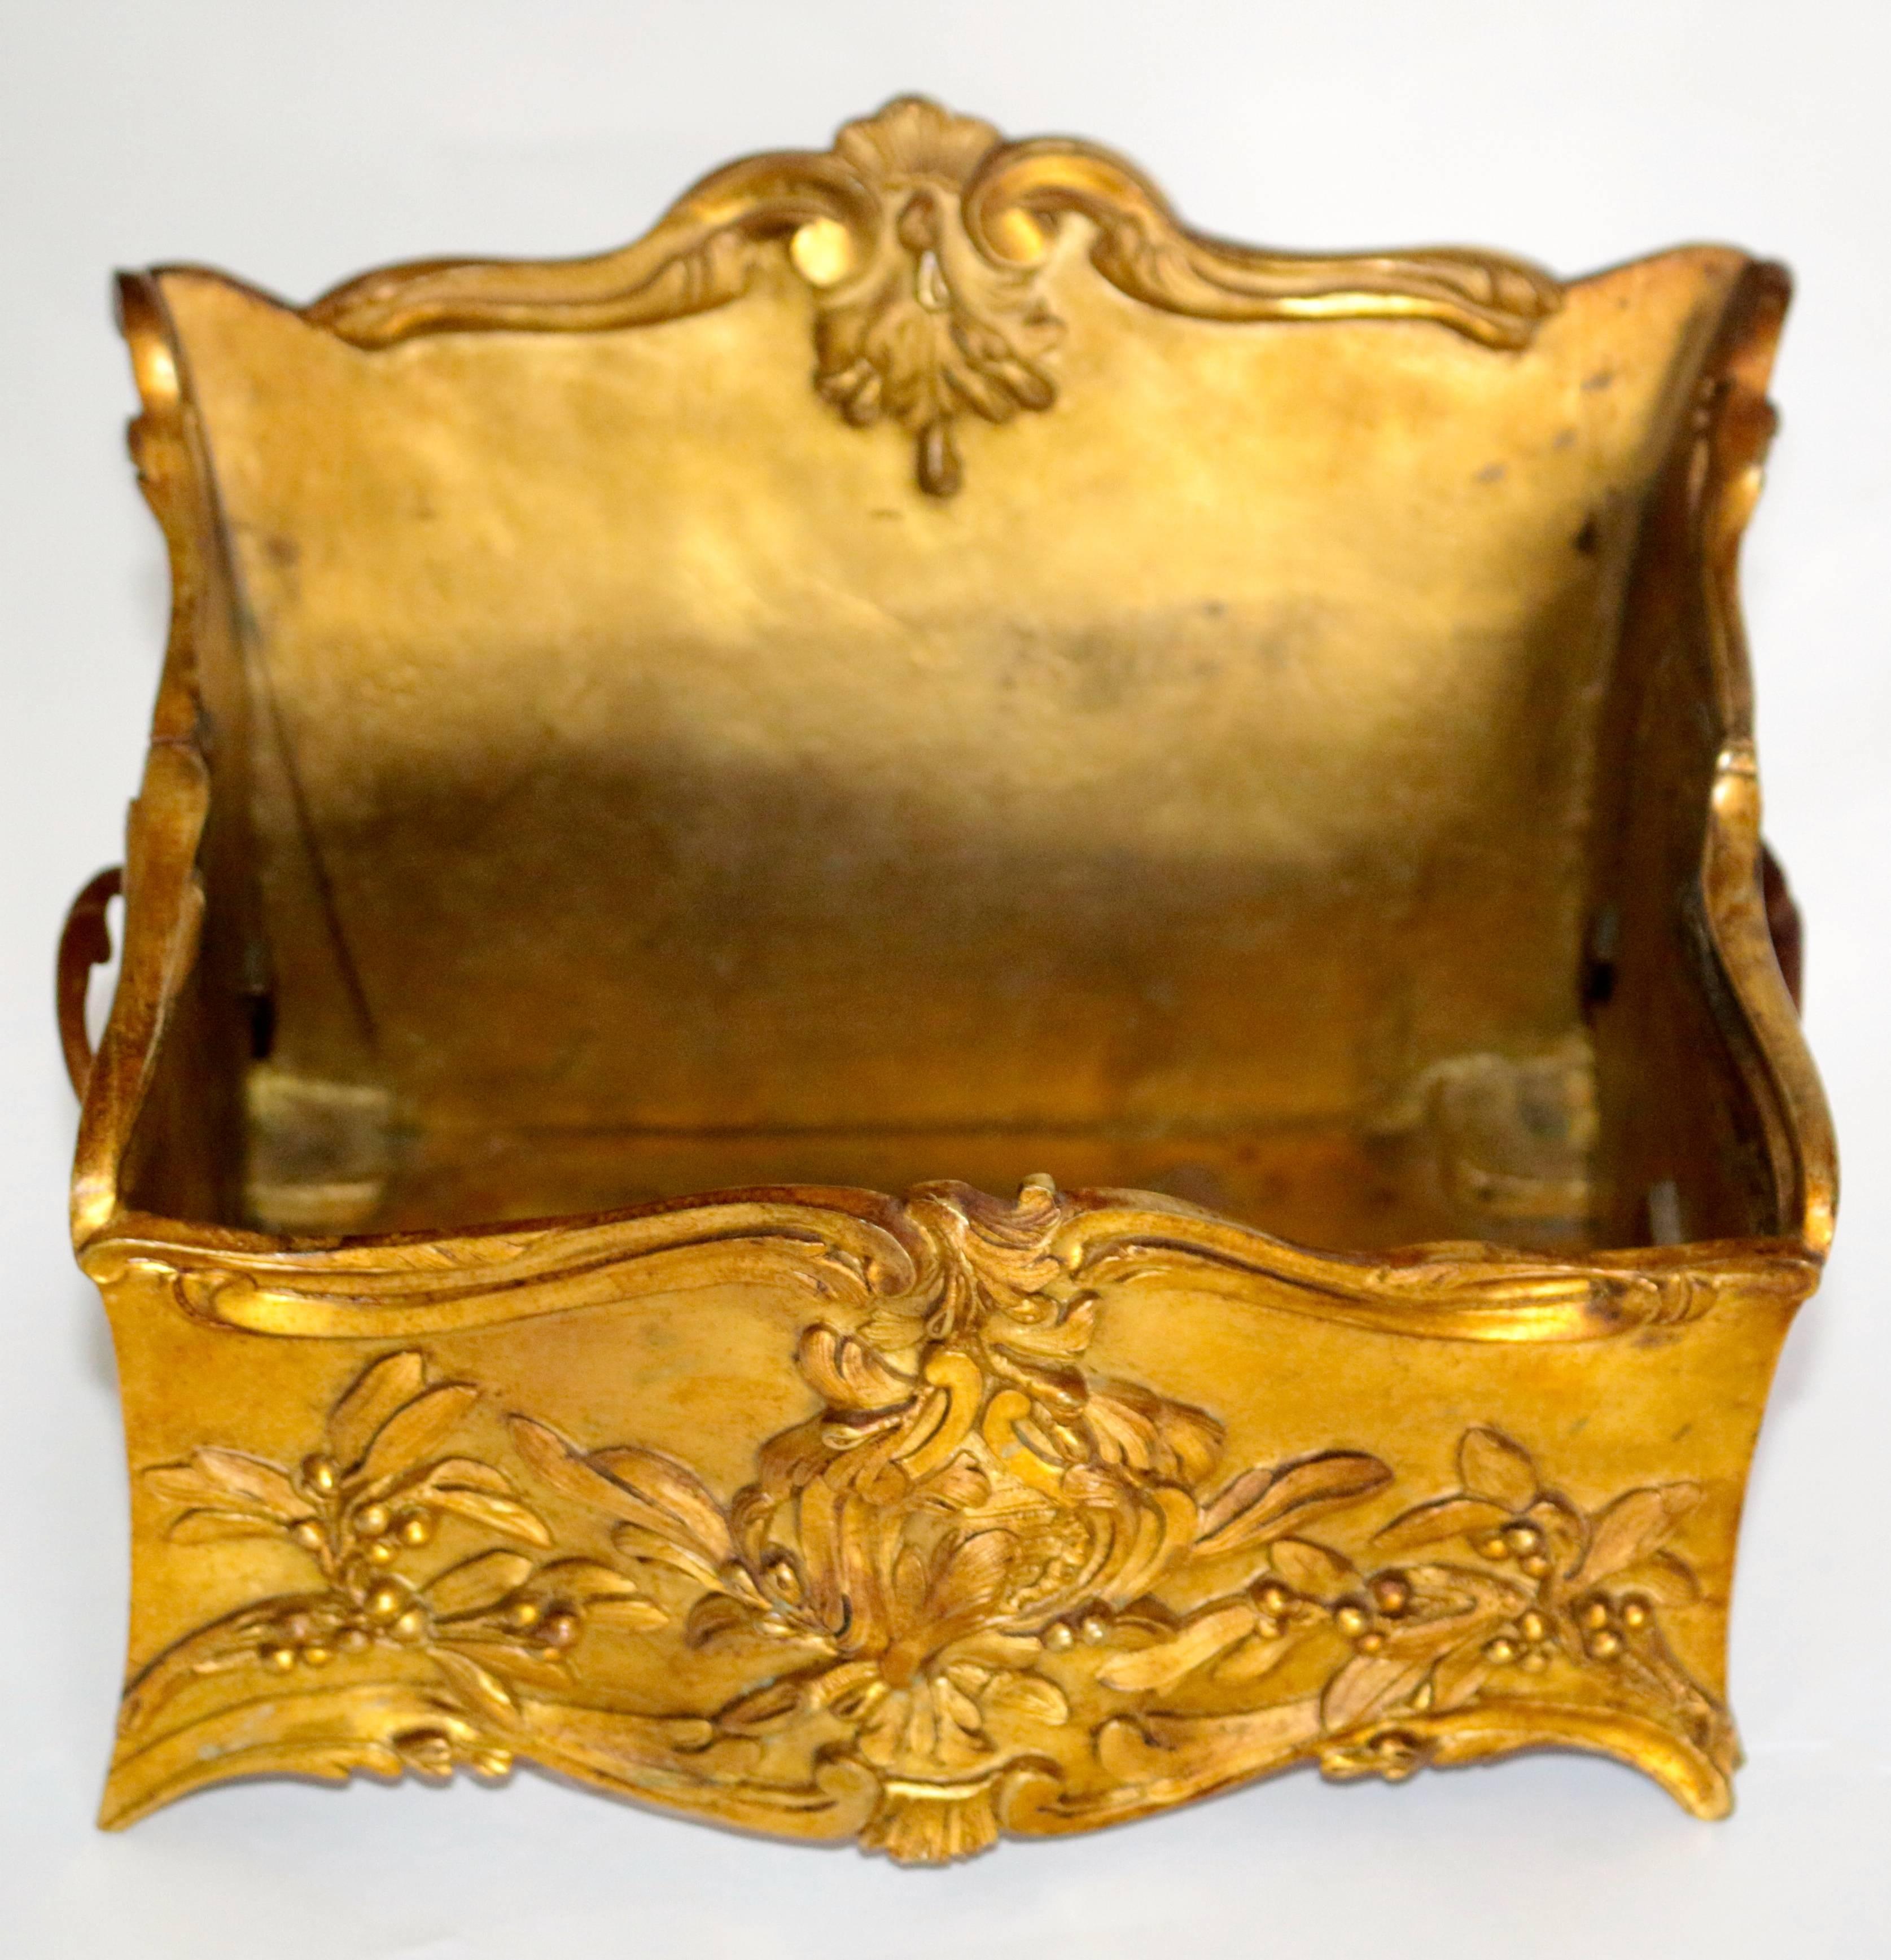 Hand-Crafted 19th Century French Decorated Gilt Bronze Box